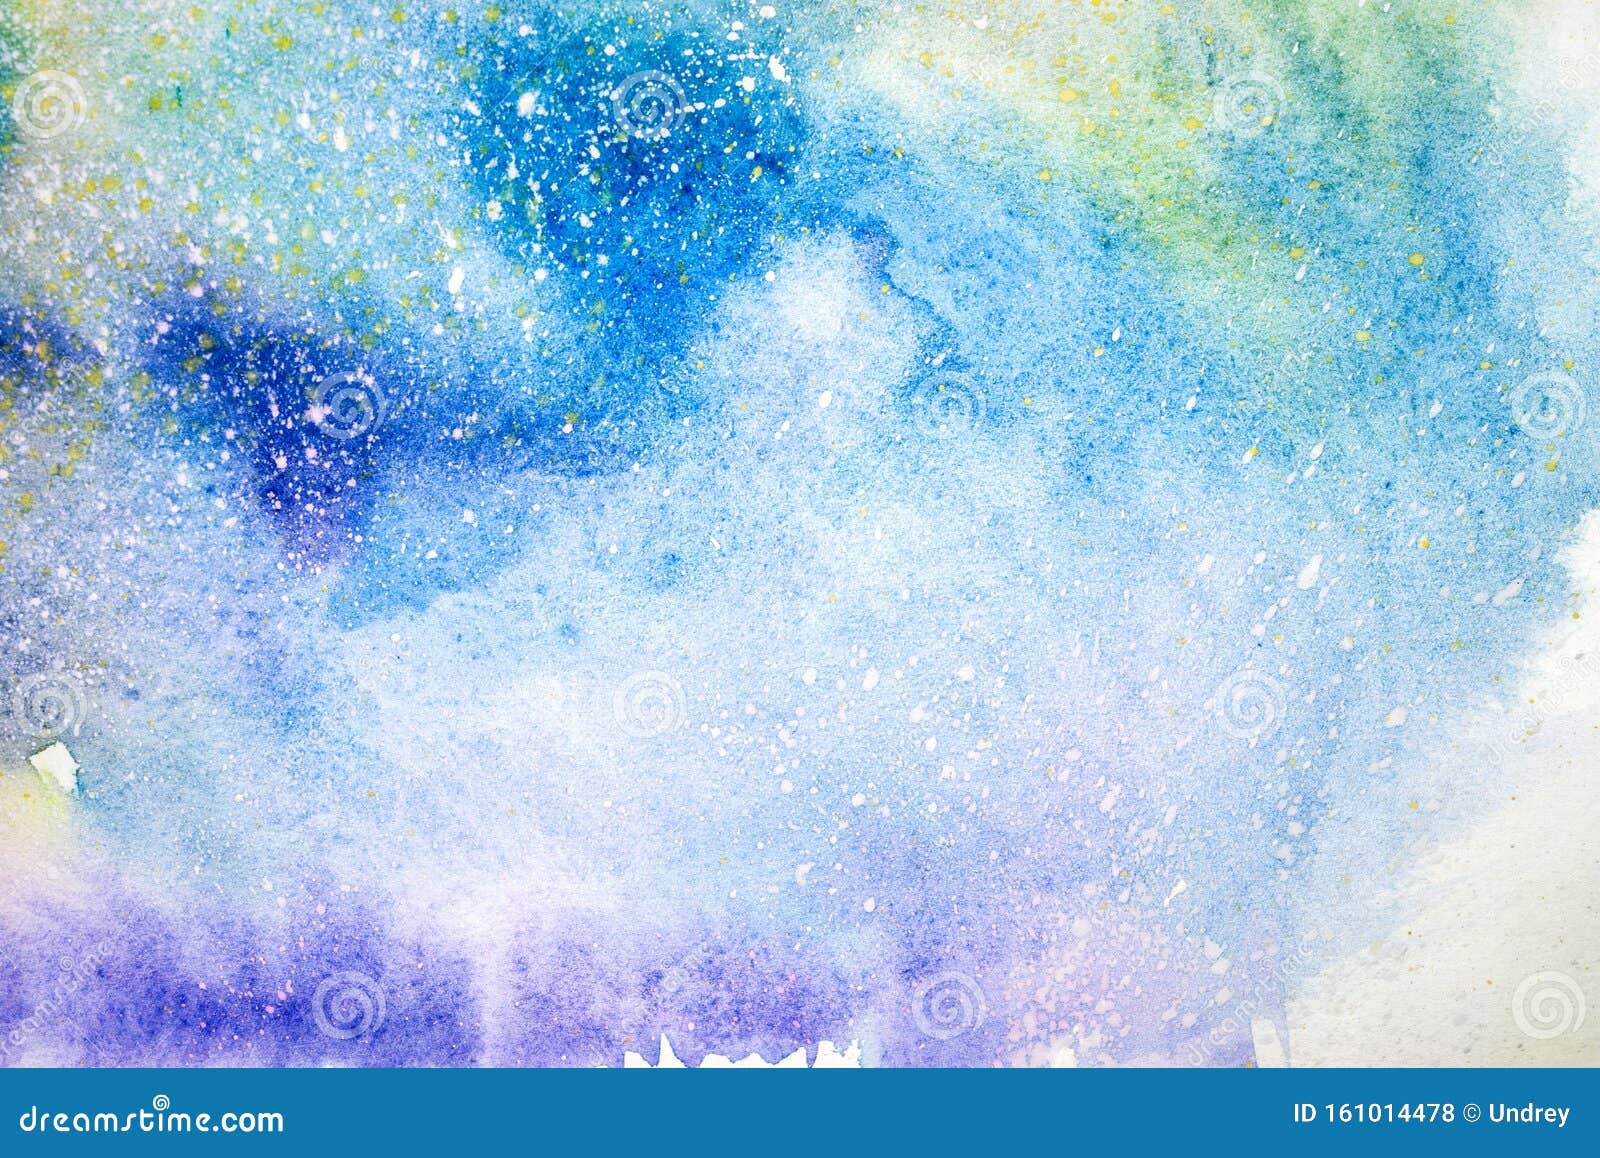 Painting In Water Colours png images | Klipartz